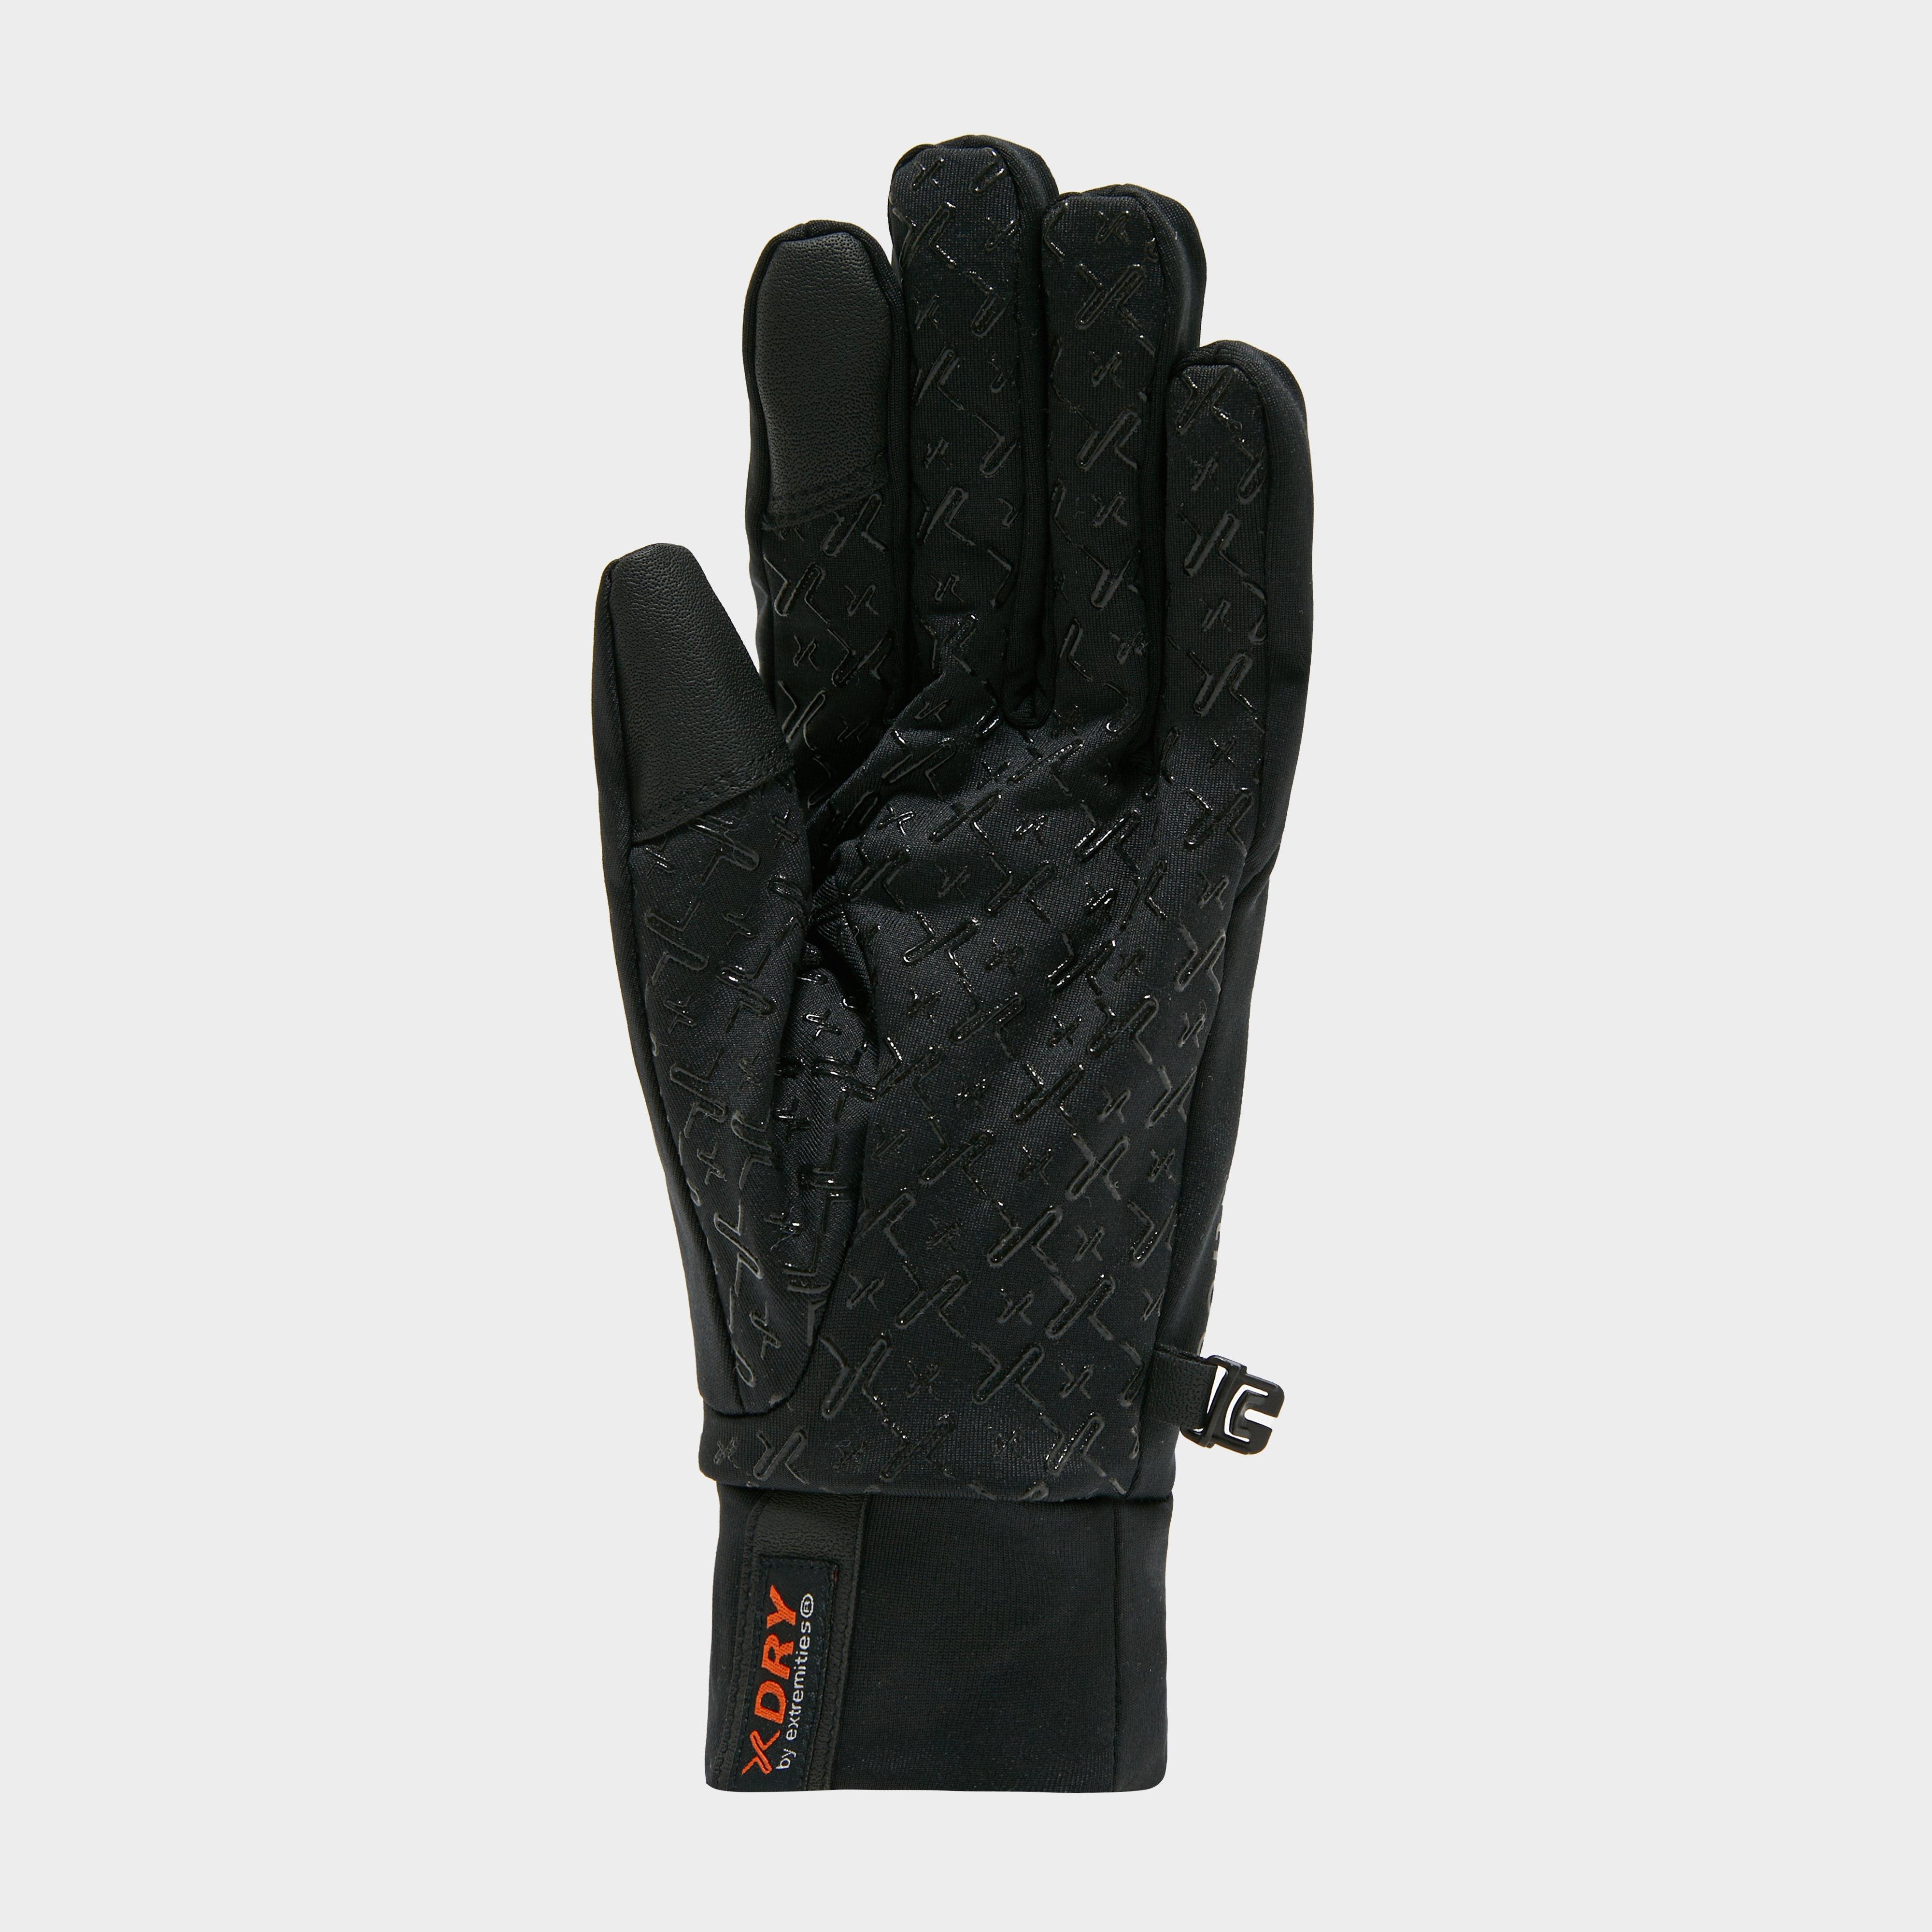 Extremities Waterproof Sticky Power Liner Glove Review